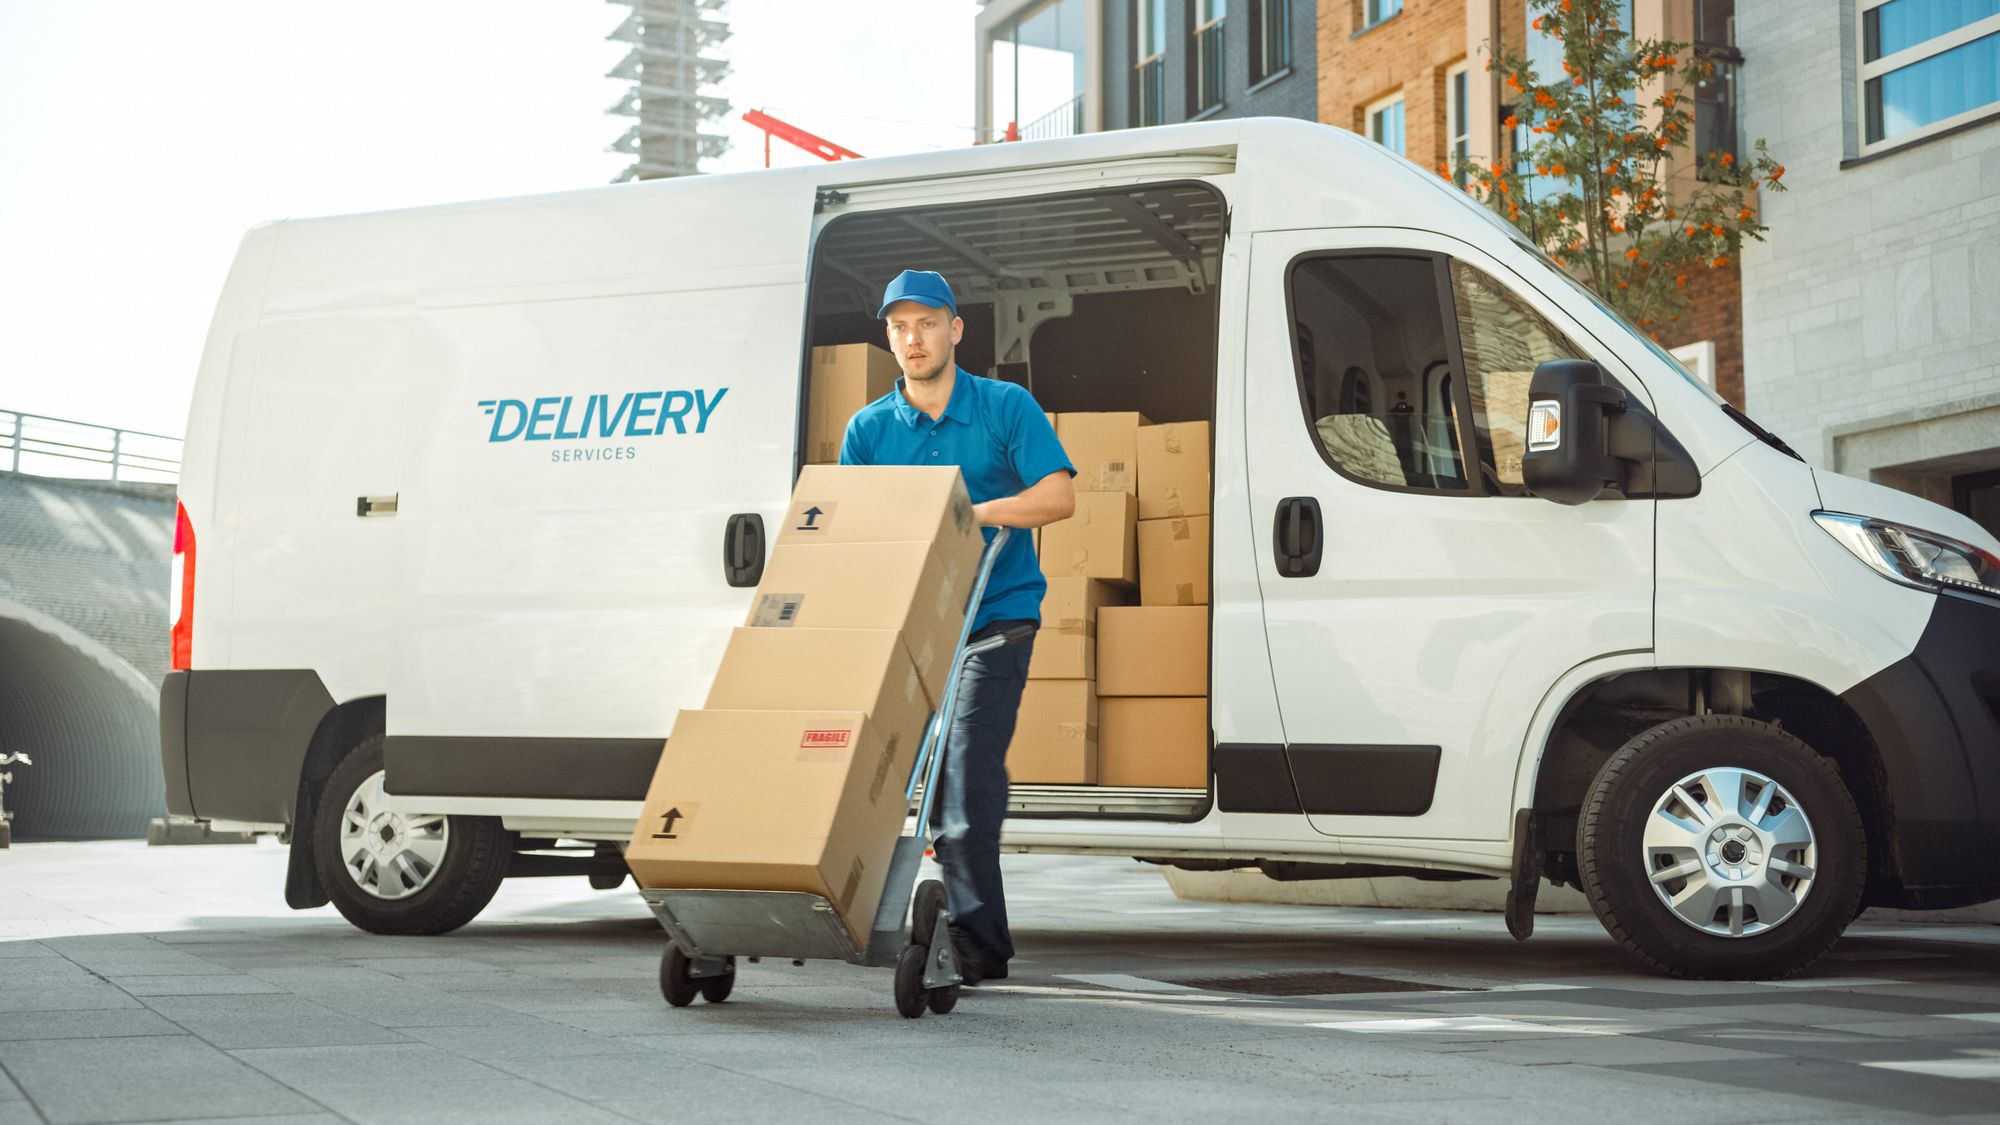 Delivery management systems